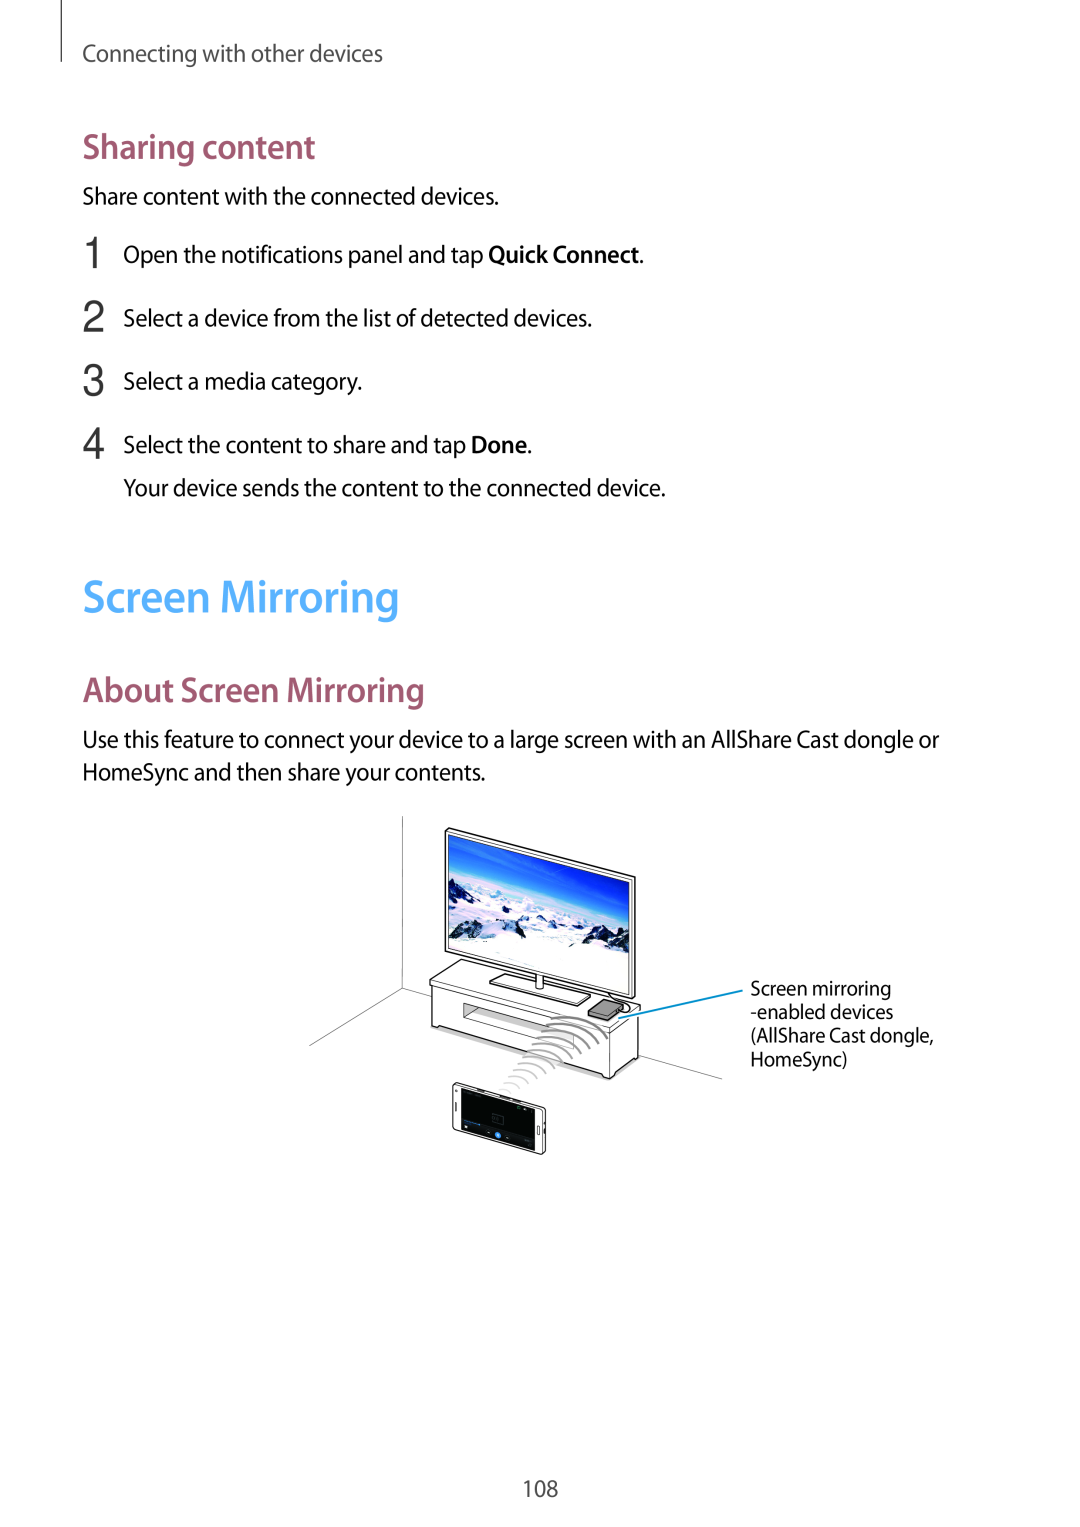 Samsung SM-A700FZDABGL, SM-A700FZKADBT manual Sharing content, About Screen Mirroring, Connecting with other devices 